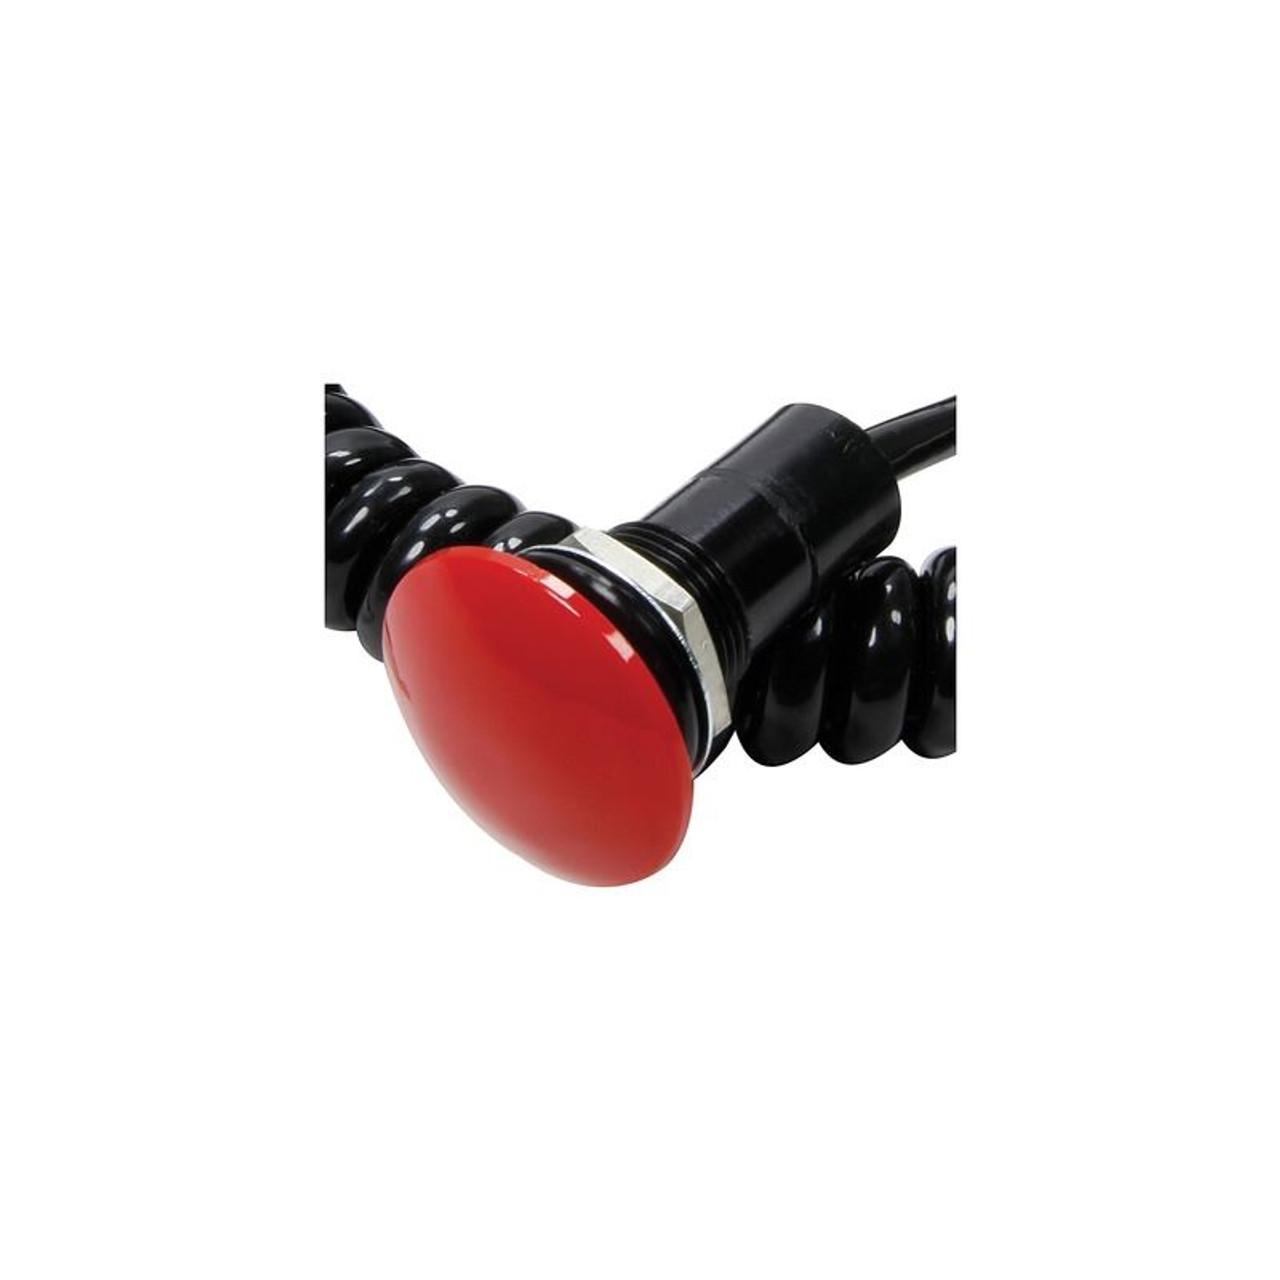 Allstar ALL80181 Push Button Switch w/Spiral Coiled Cord, Momentary, Large  Red Button, Each